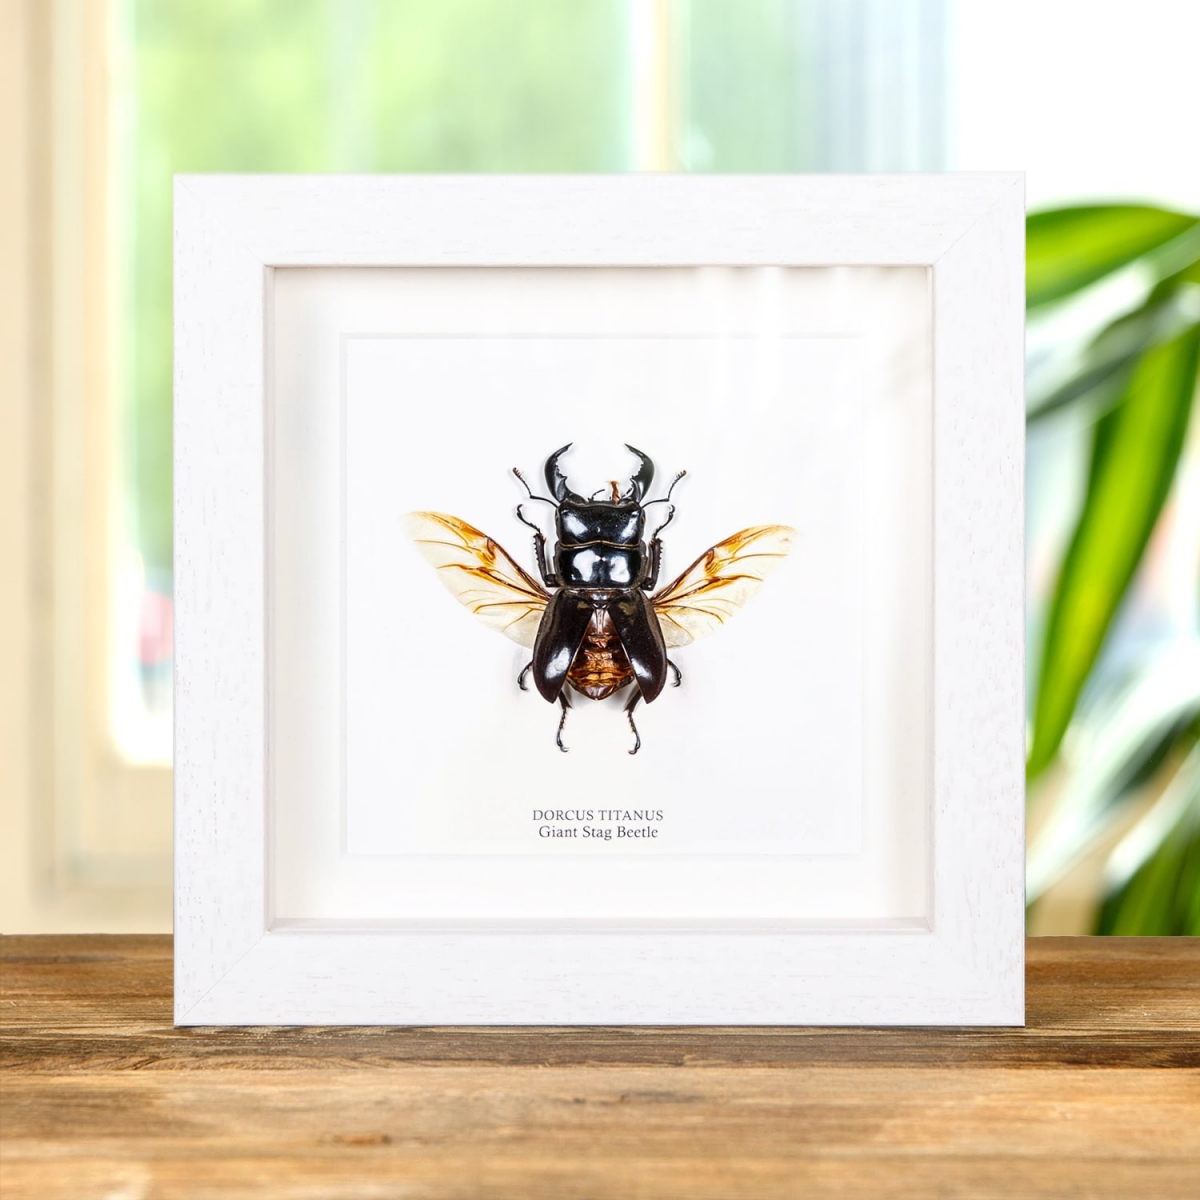 Wing-spread Giant Stag Beetle in Box Frame (Dorcus titanus)